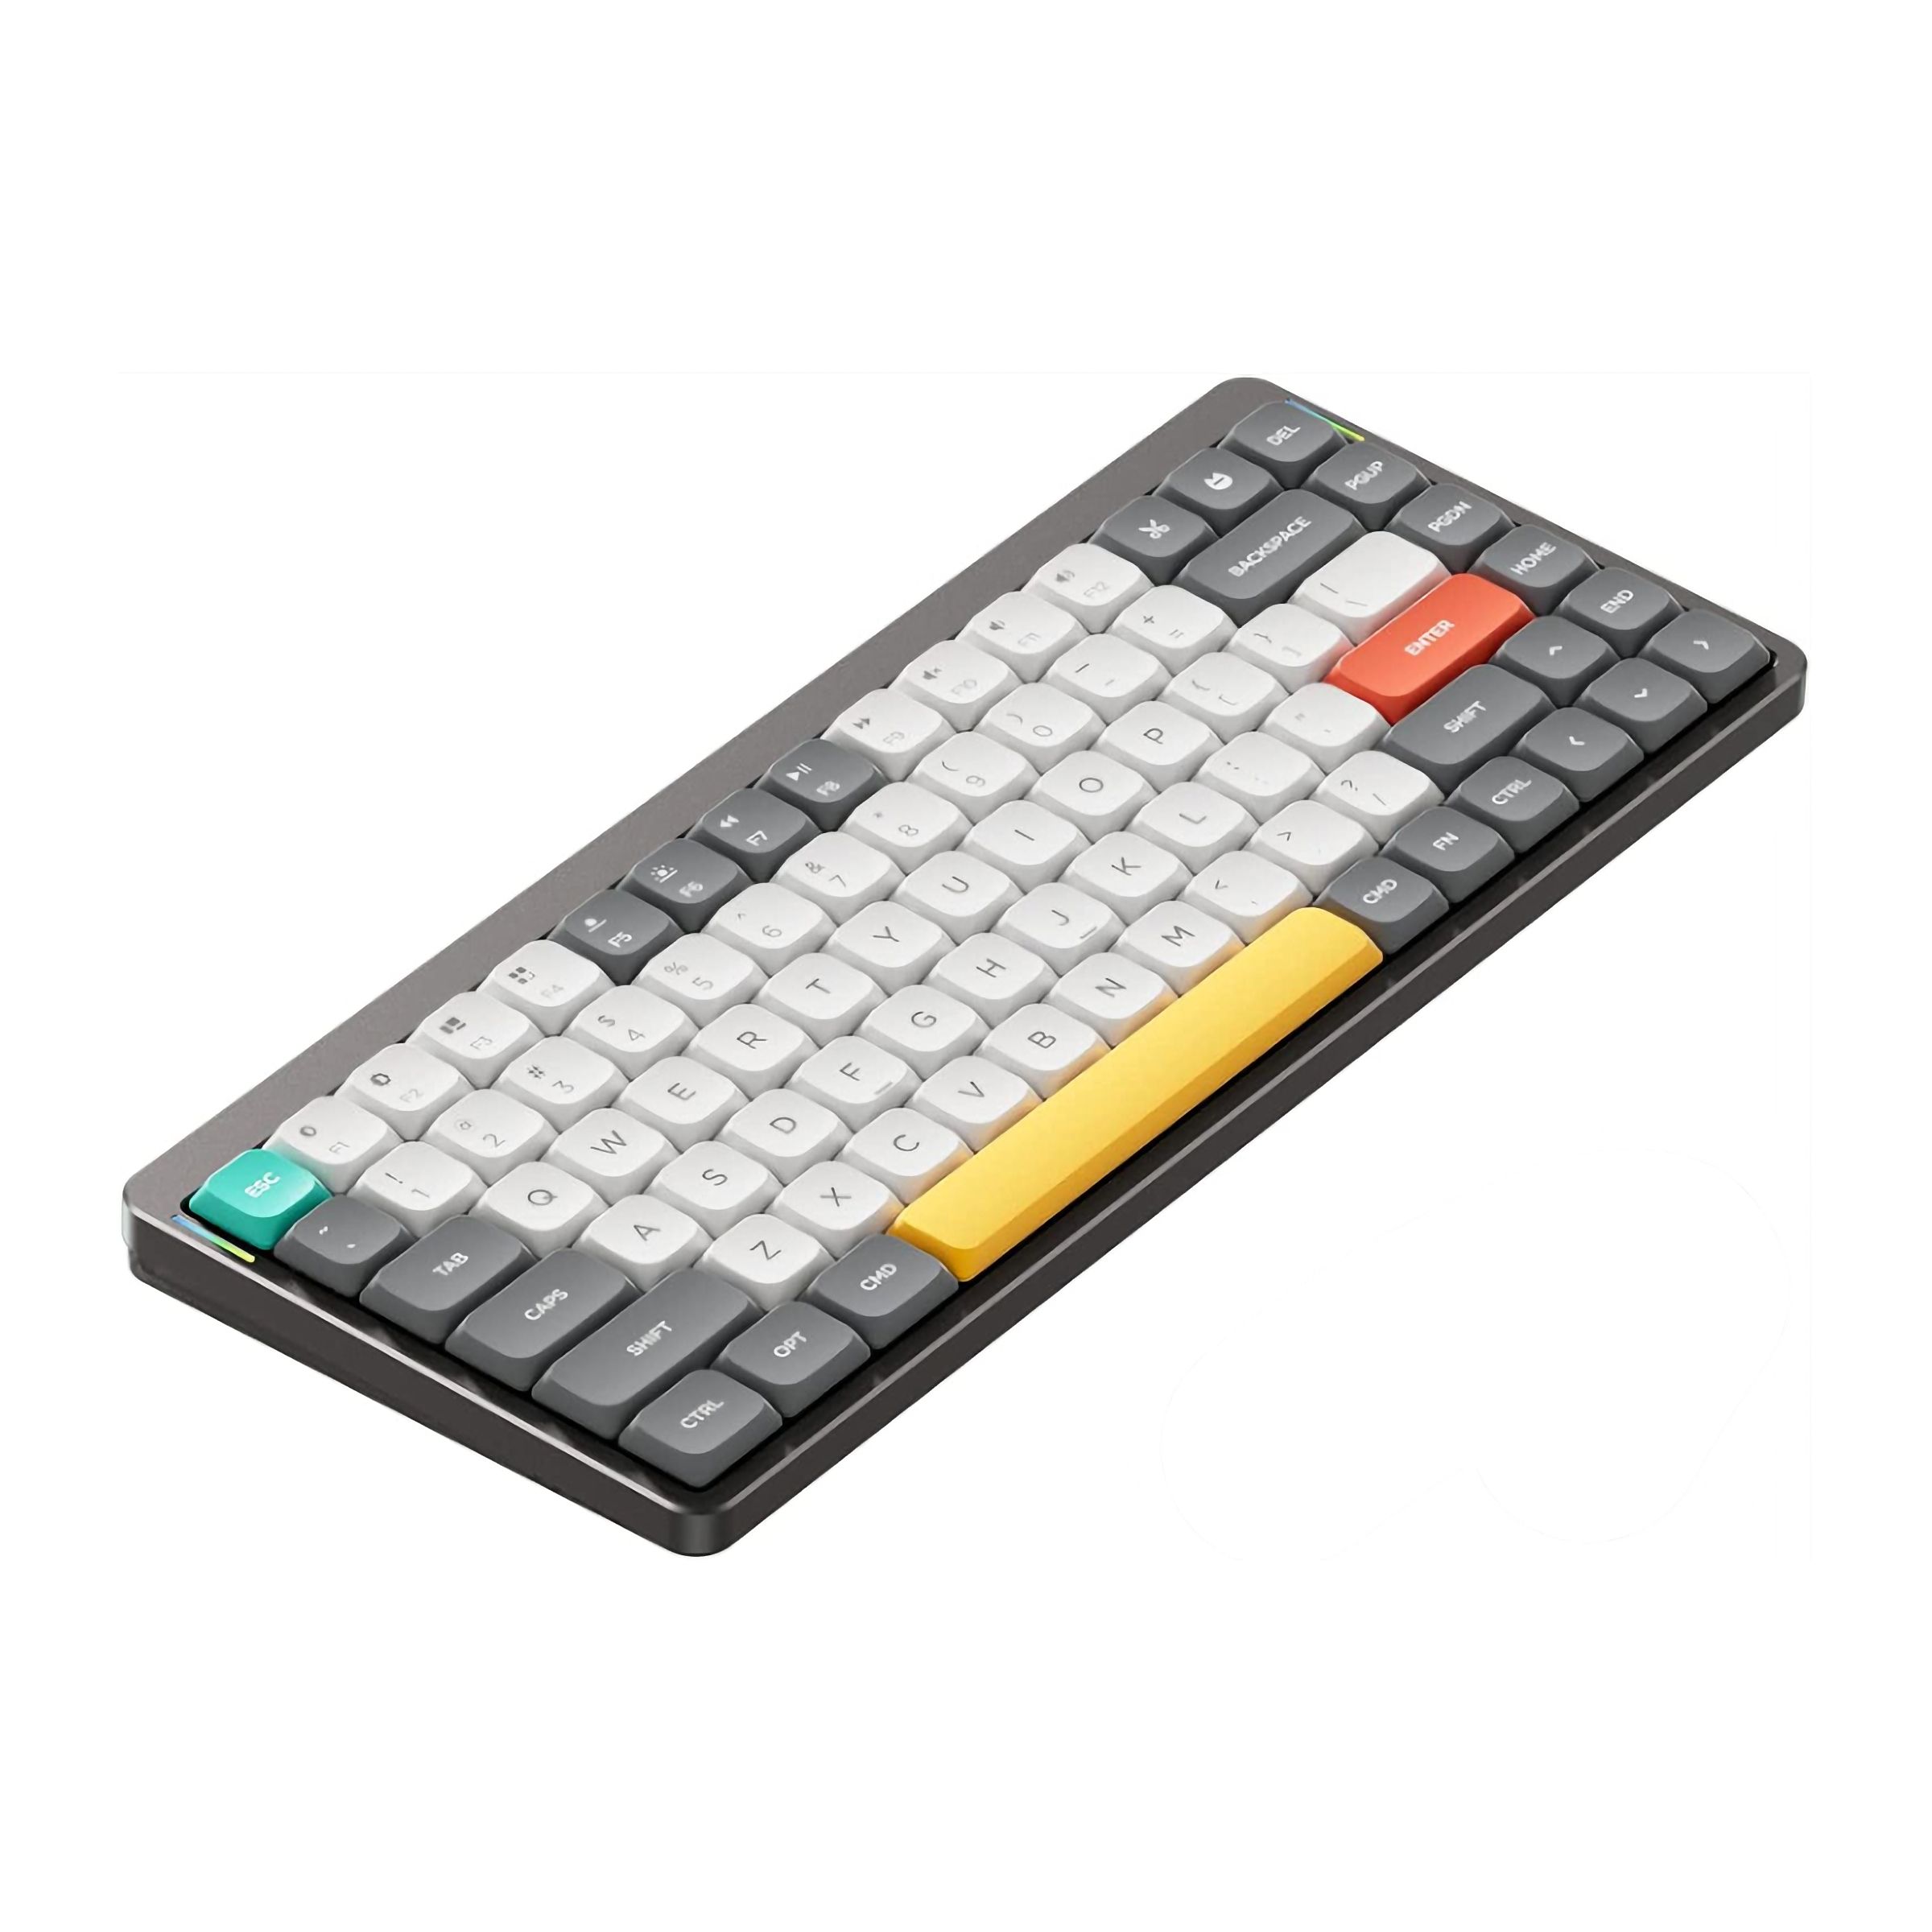 A low-profile mechanical keyboard with a yellow pace bar and an orange enter key.